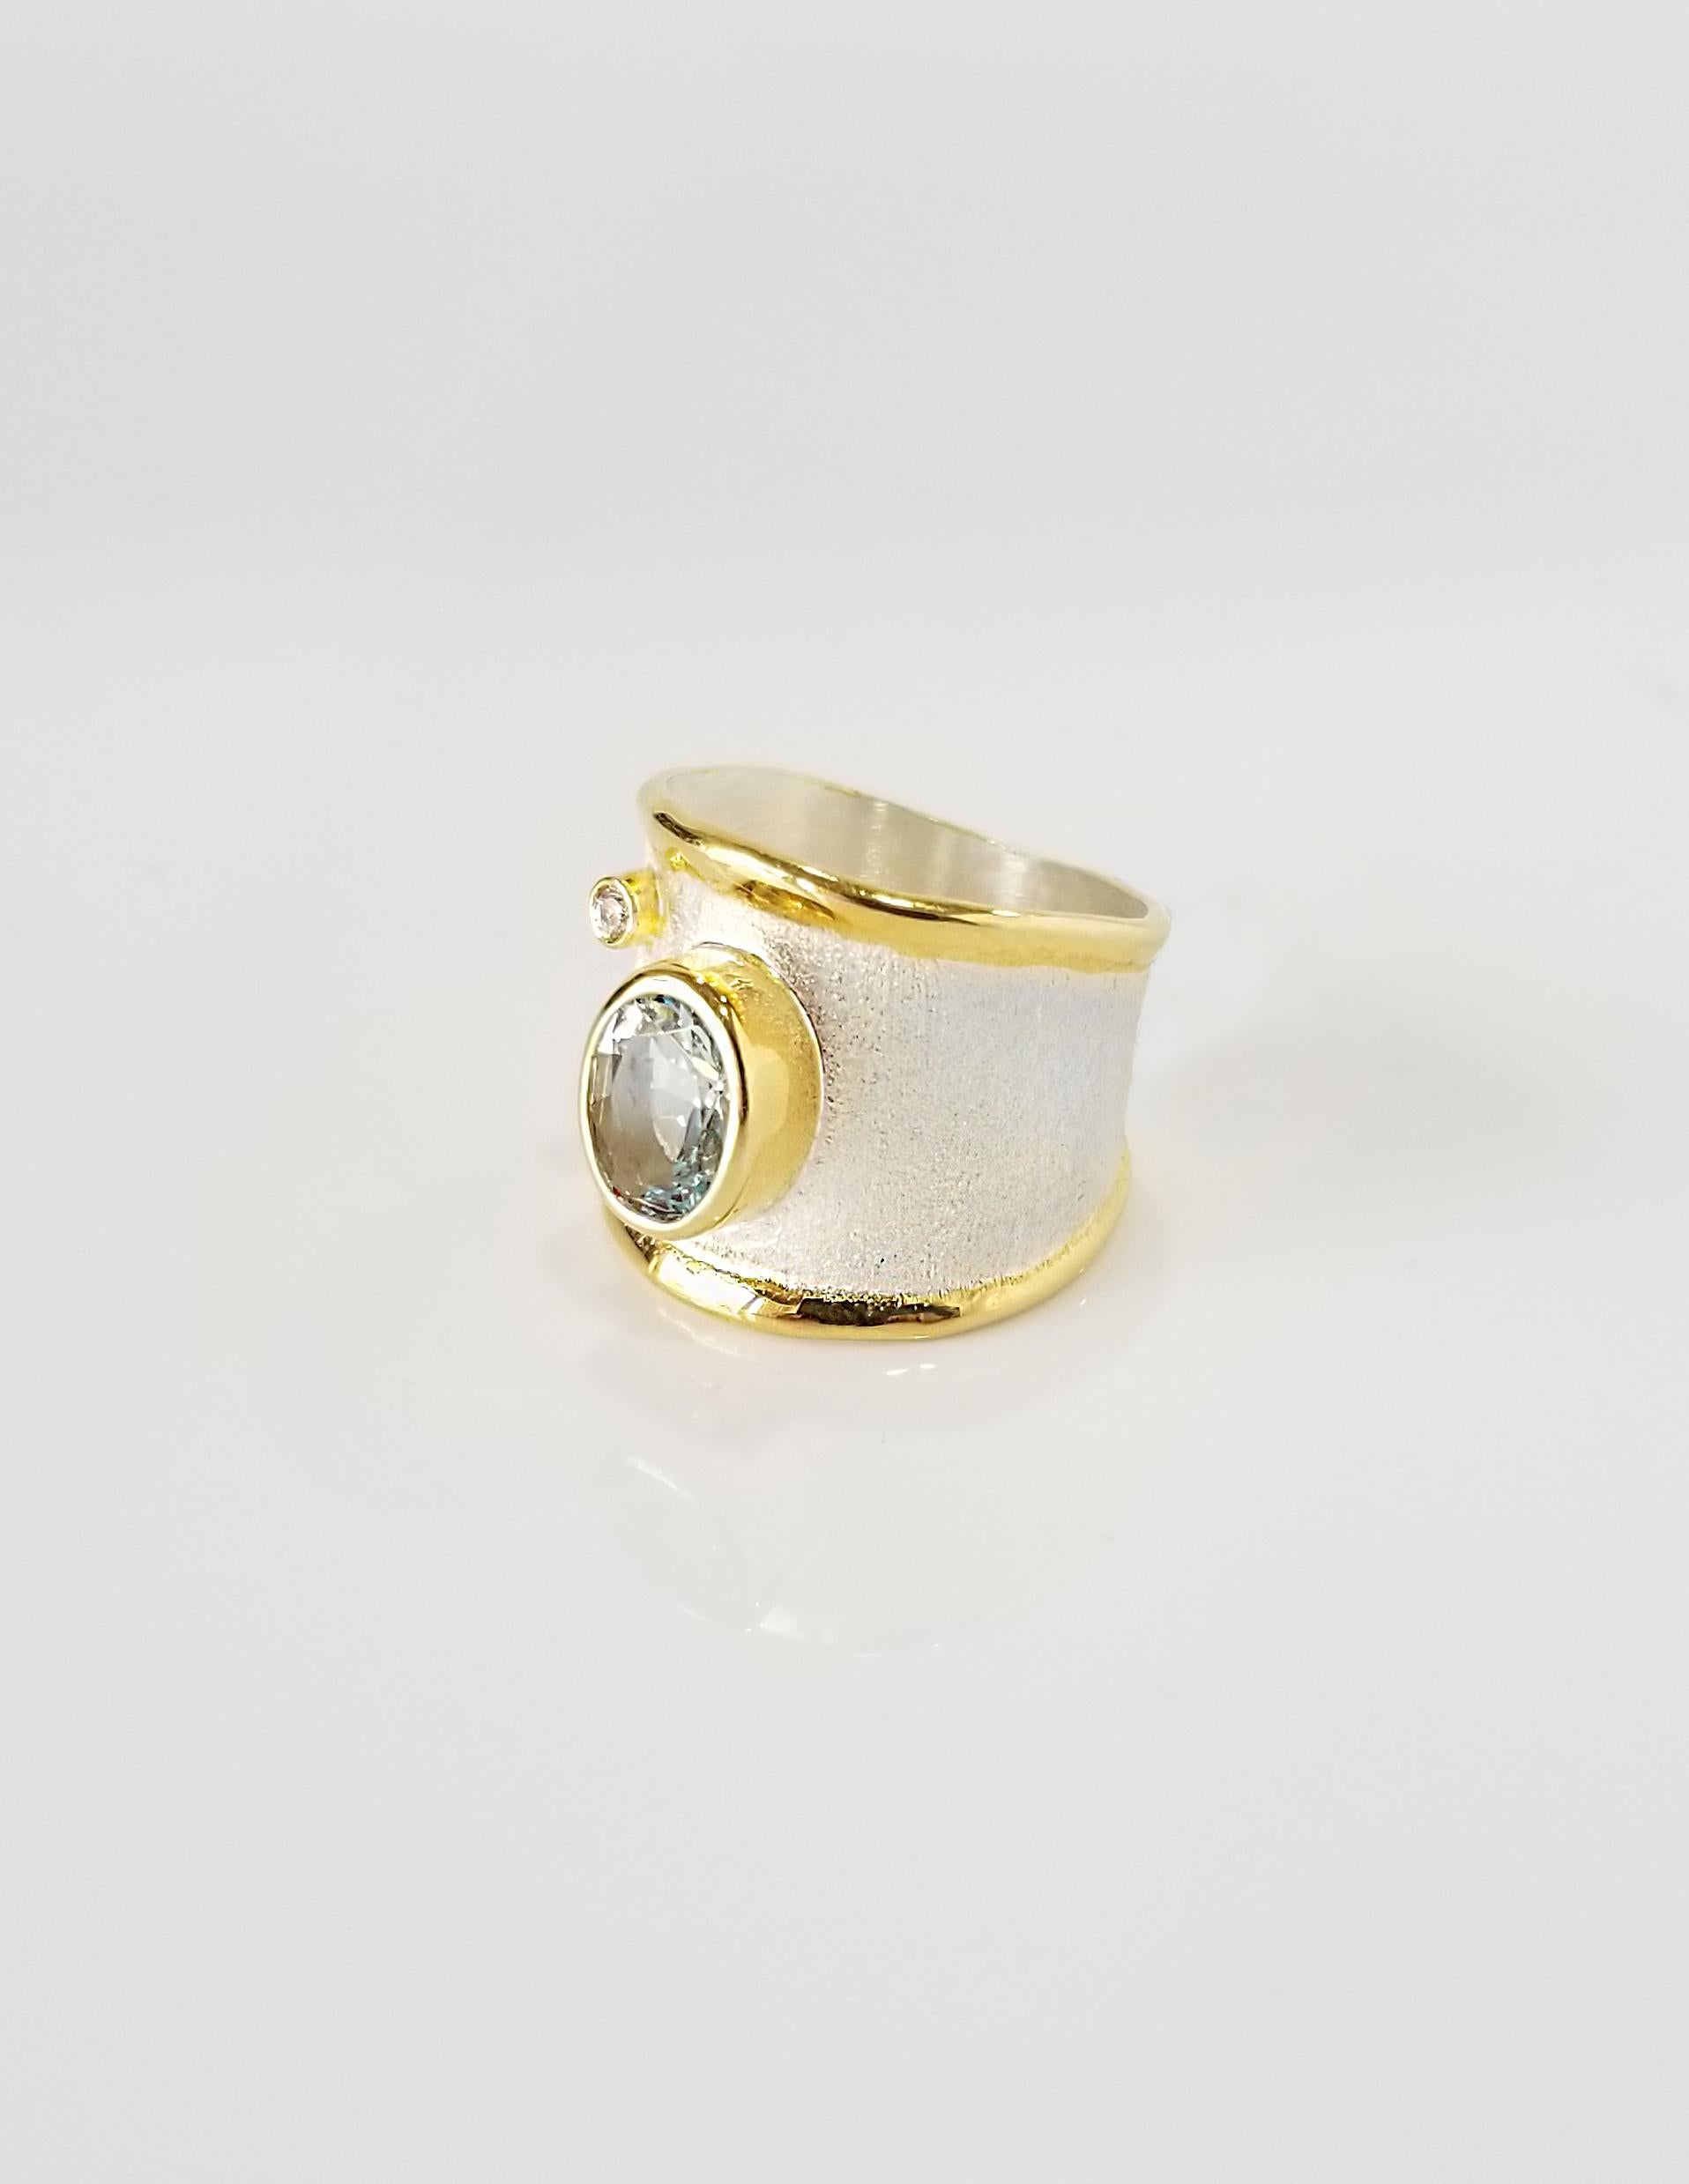 This Yianni Creations handmade artisan ring from Midas Collection was crafted in Greece from fine silver of 950 purity and is plated with palladium to protect it from the elements. We use special techniques of craftsmanship - the brushed texture and